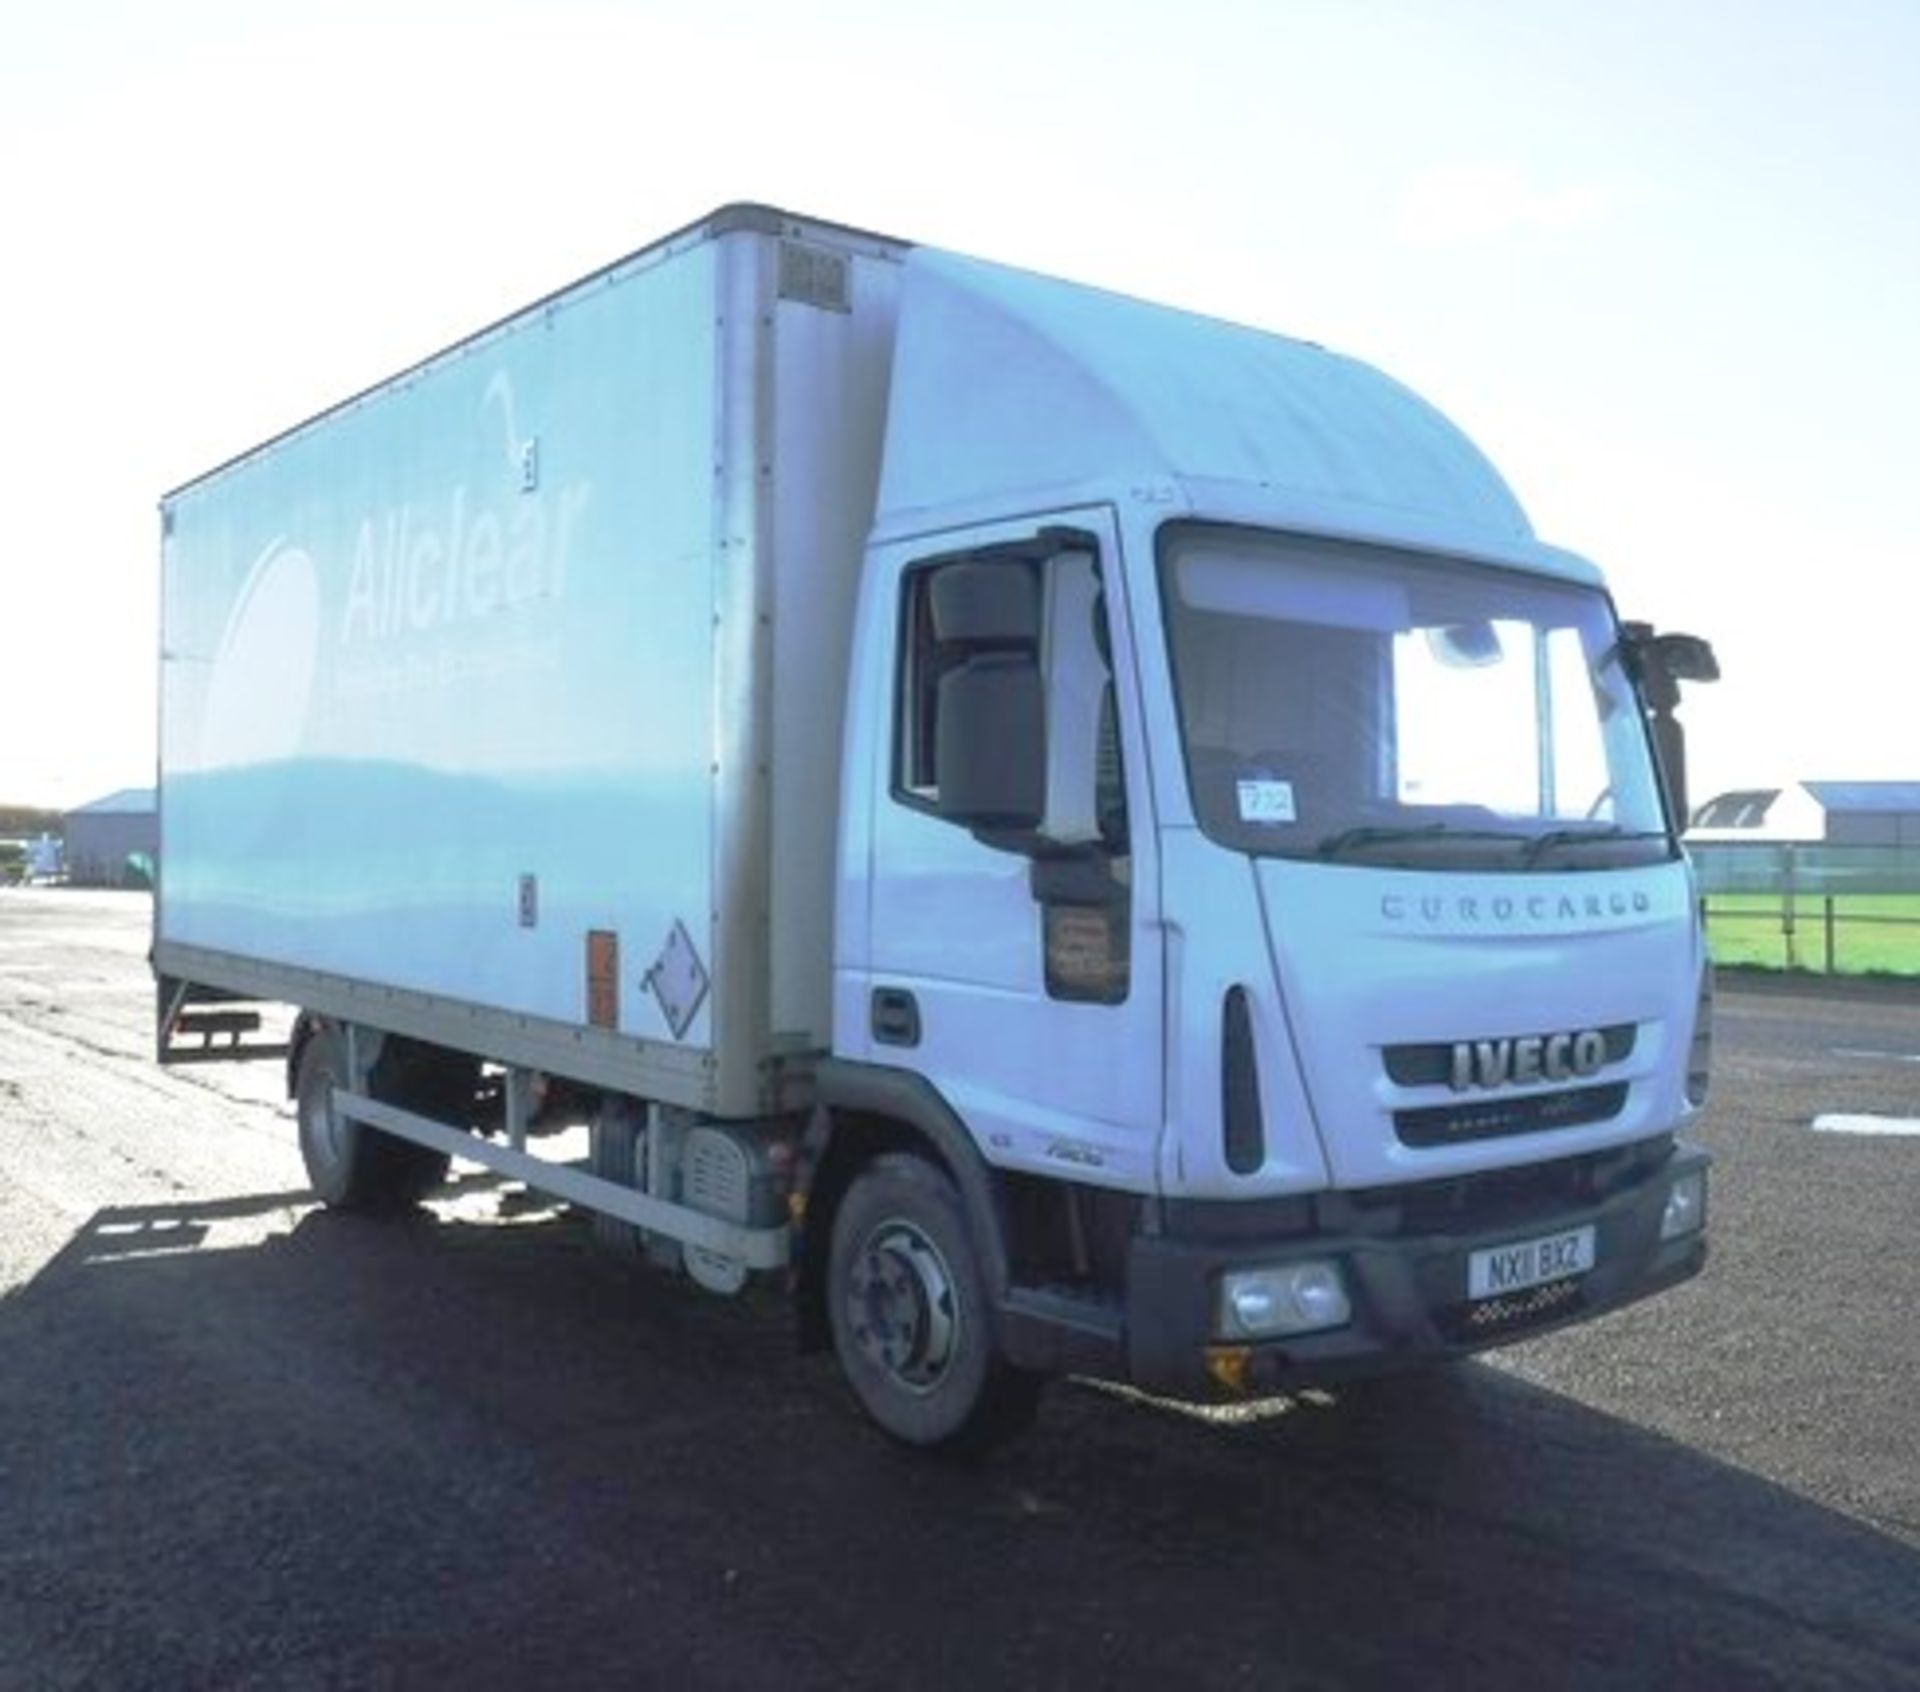 IVECO MODEL EUROCARGO (MY 2008) - 3920cc - Image 18 of 24